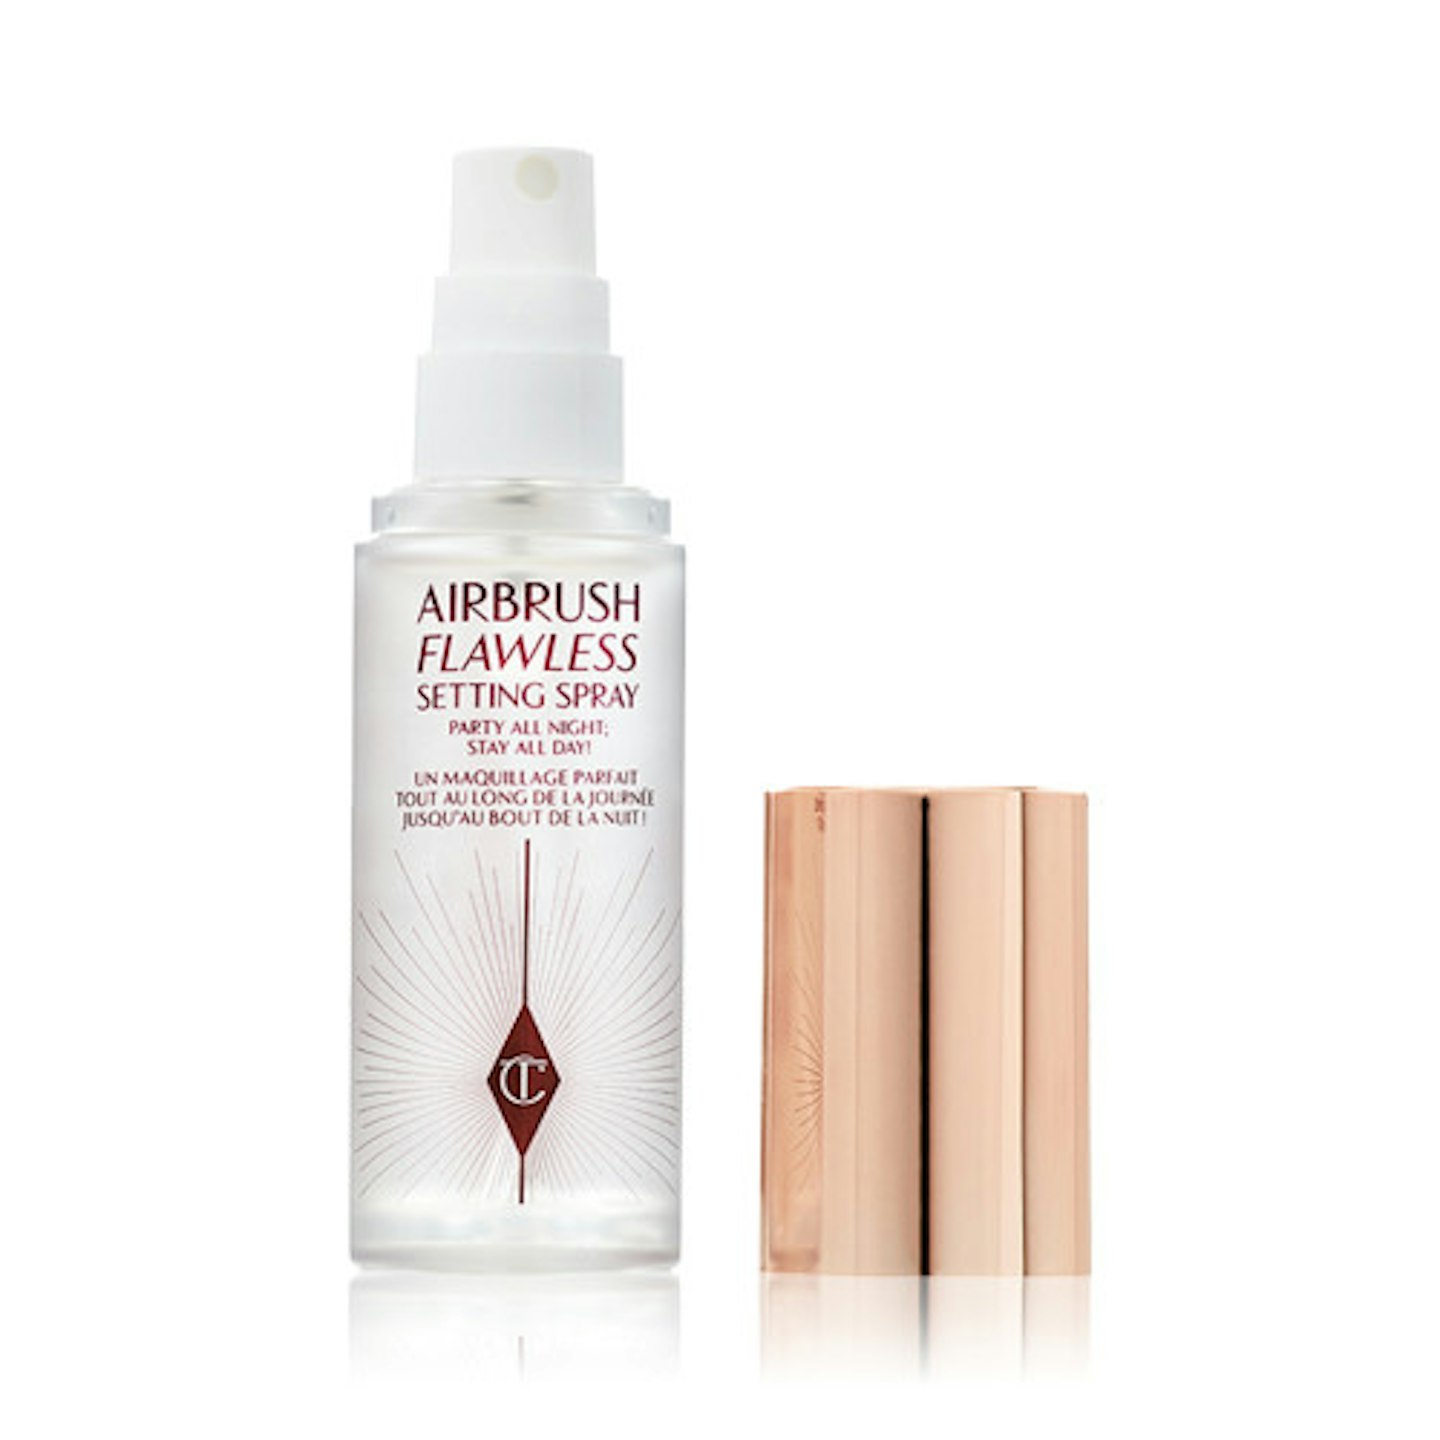 New! Airbrush flawless setting spray travel size